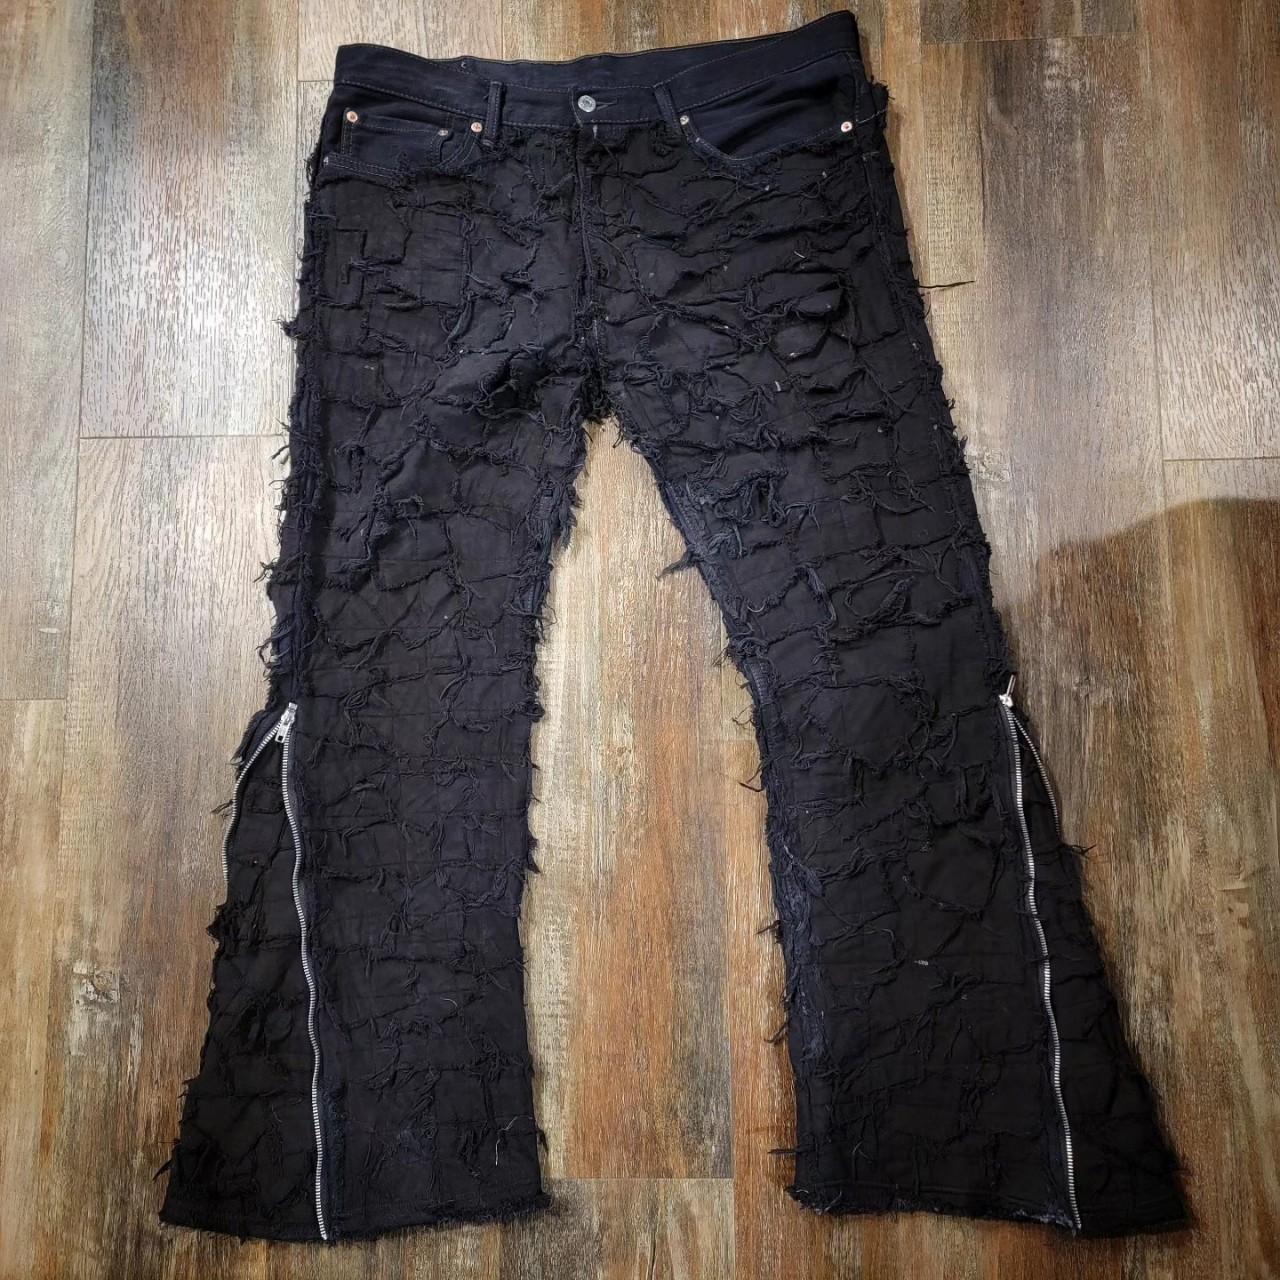 CUSTOM PATCH WORK JEANS WITH ZIPPER FLARE MADE BY... - Depop